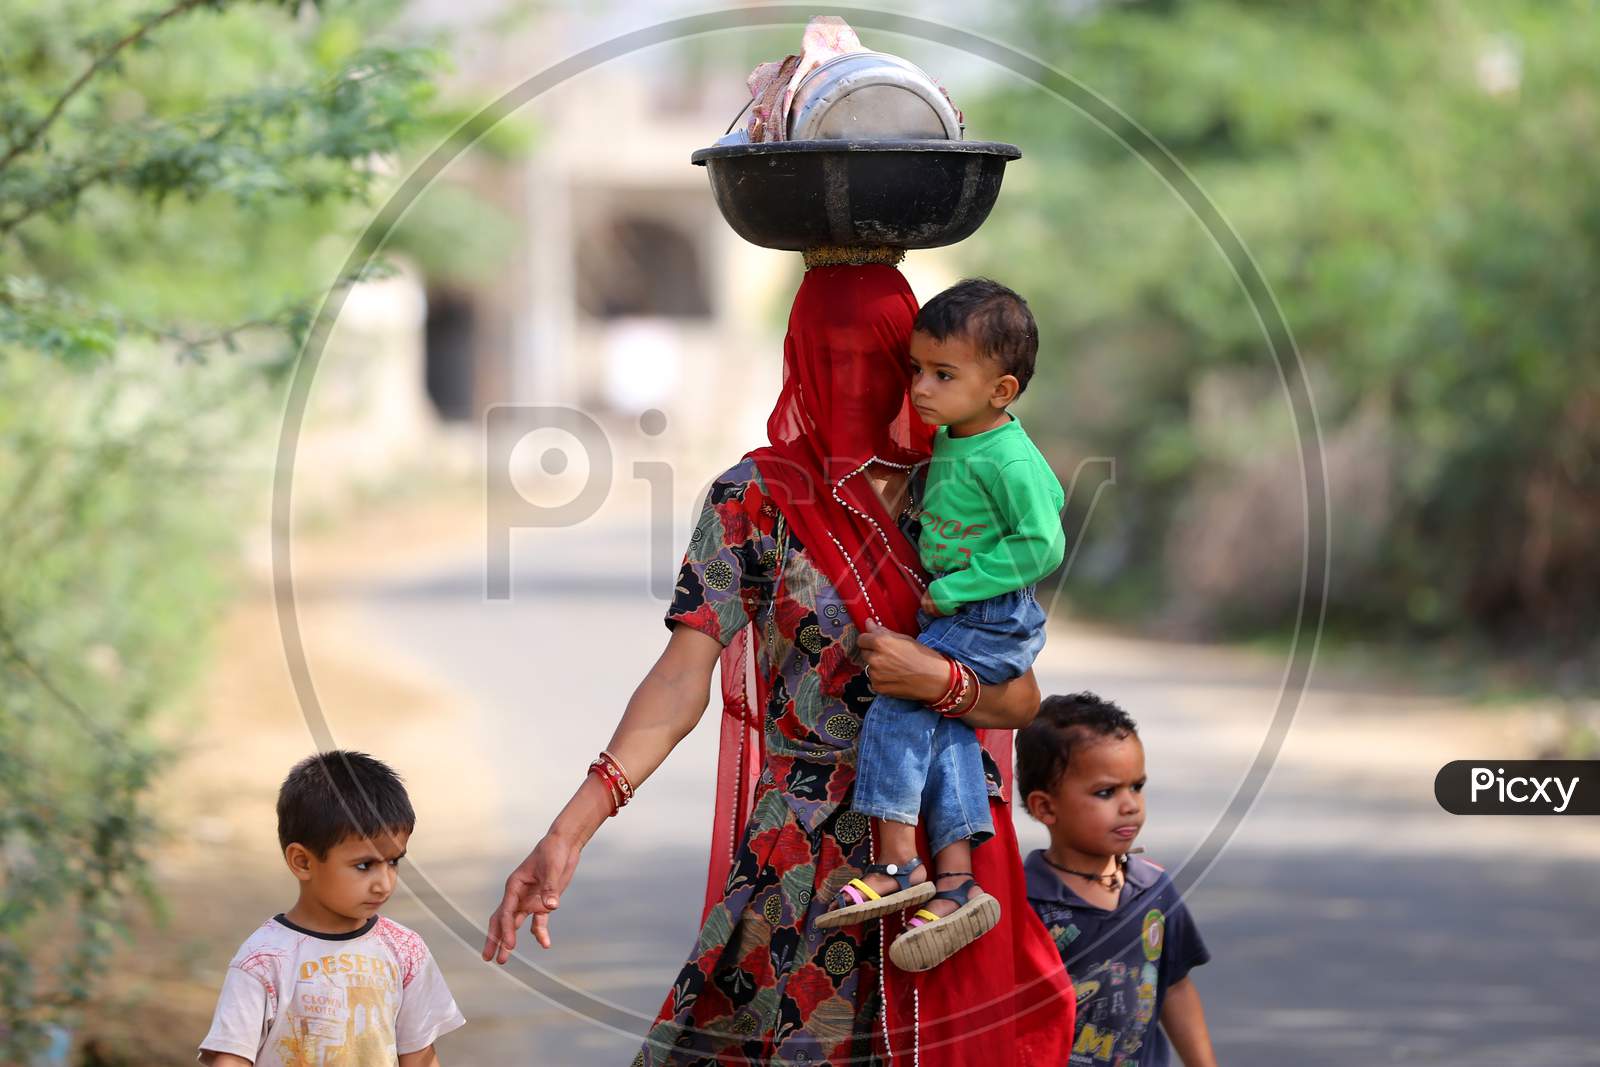 A woman walks with her children on the eve of Mother's day on the outskirts village of Ajmer, Rajasthan, India on 09 May 2020.